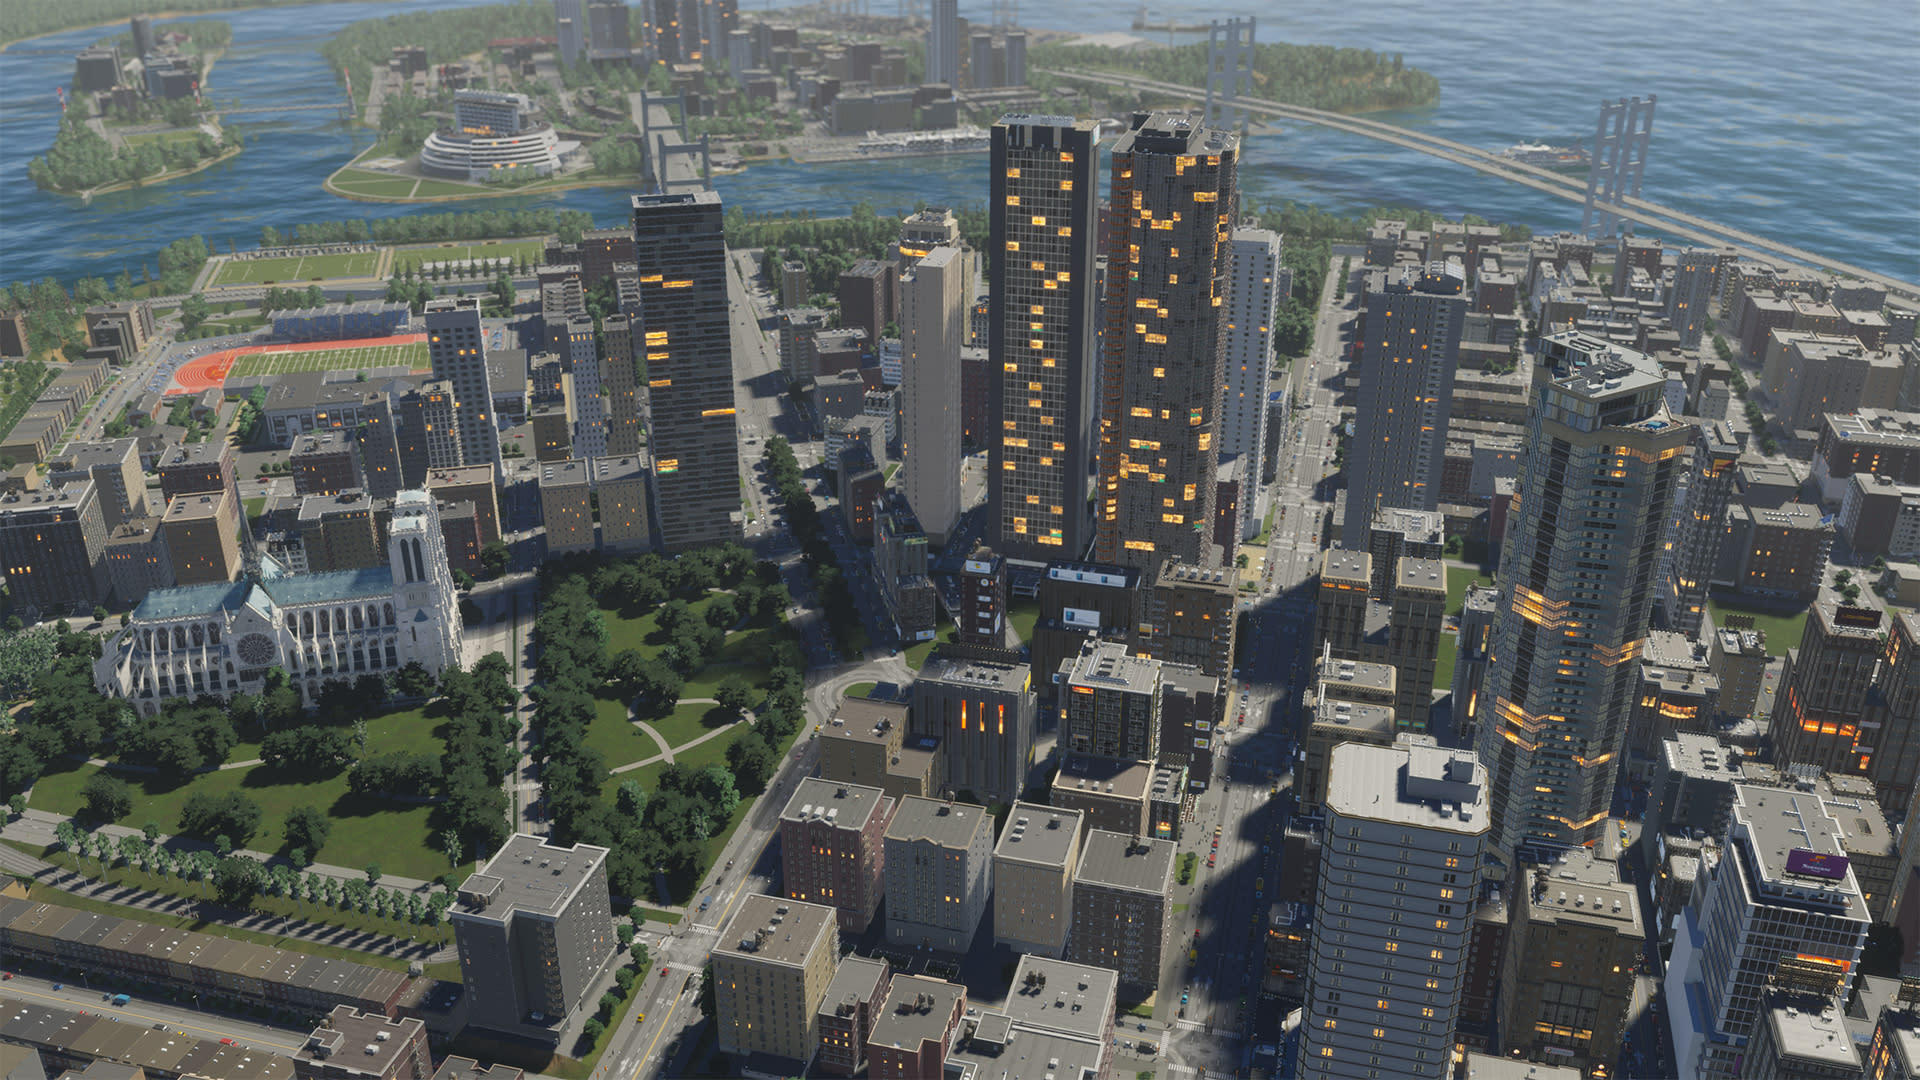 Cities Skylines 2 release date, trailers, gameplay, and news